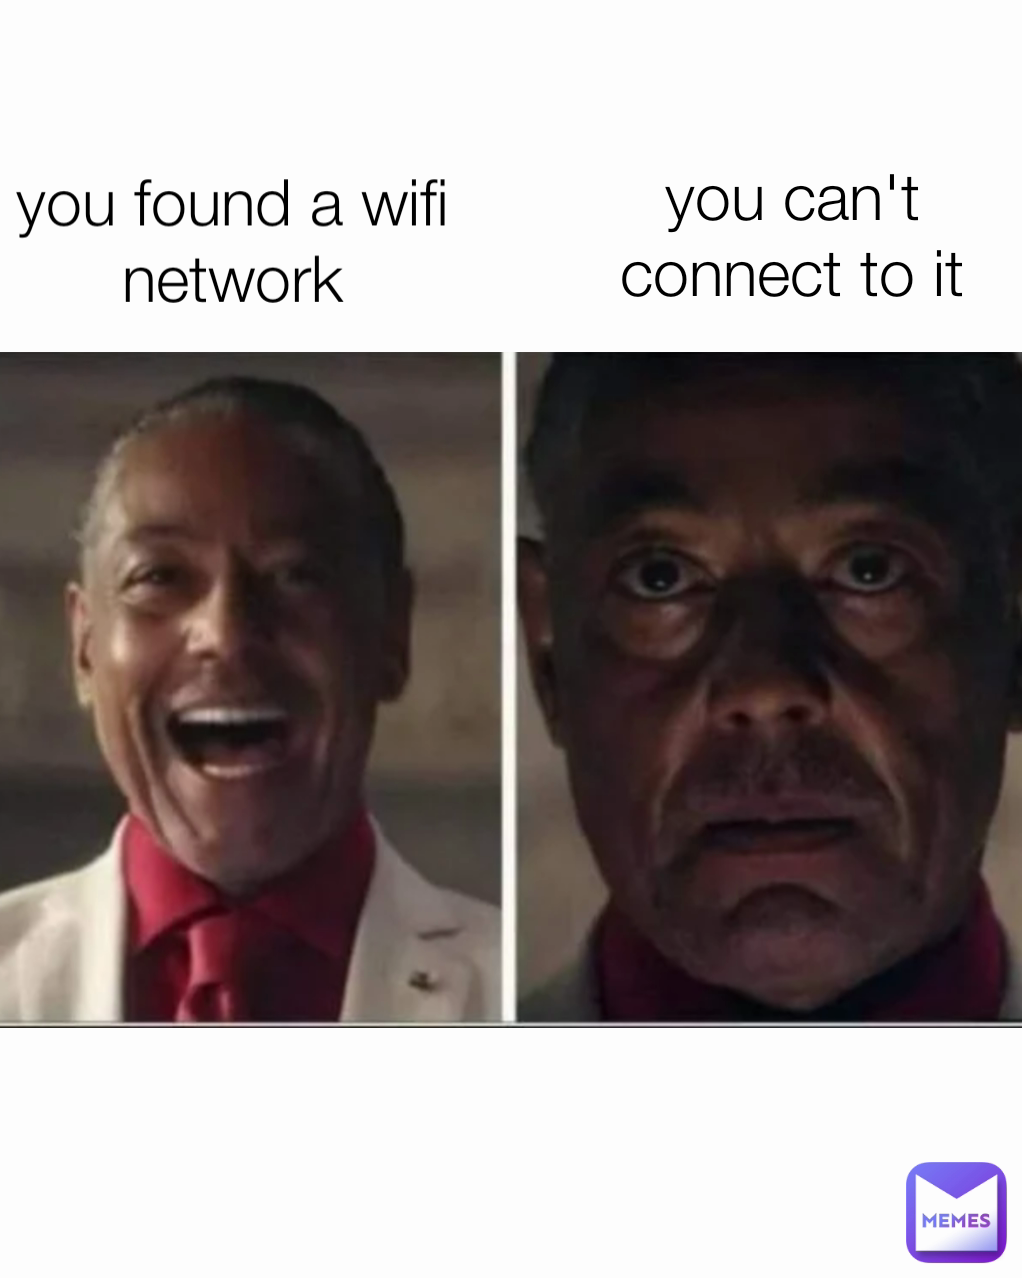 you found a wifi network you can't connect to it